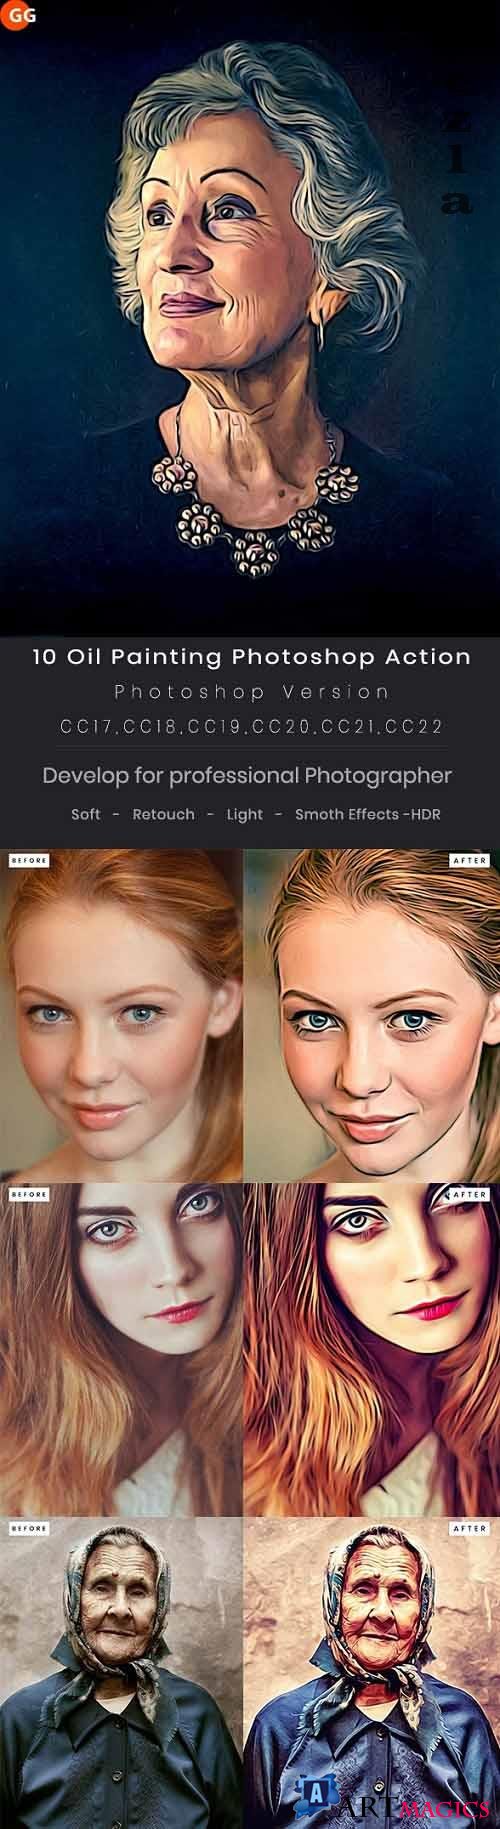 10 Oil Painting Photoshop Action - 22851047